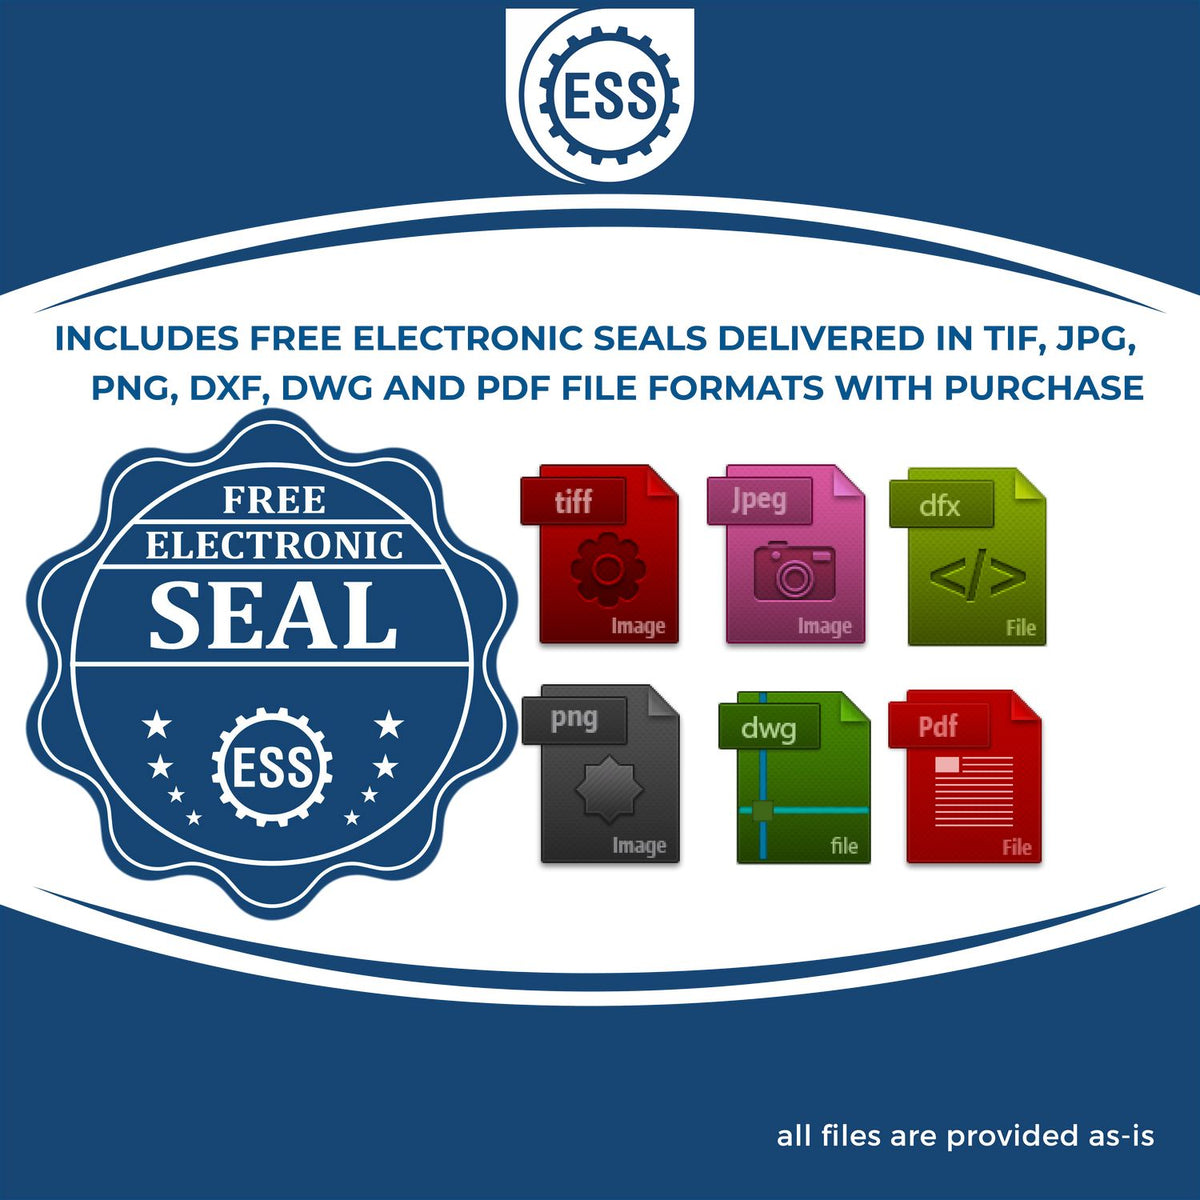 An infographic for the free electronic seal for the State of Texas Architectural Seal Embosser illustrating the different file type icons such as DXF, DWG, TIF, JPG and PNG.